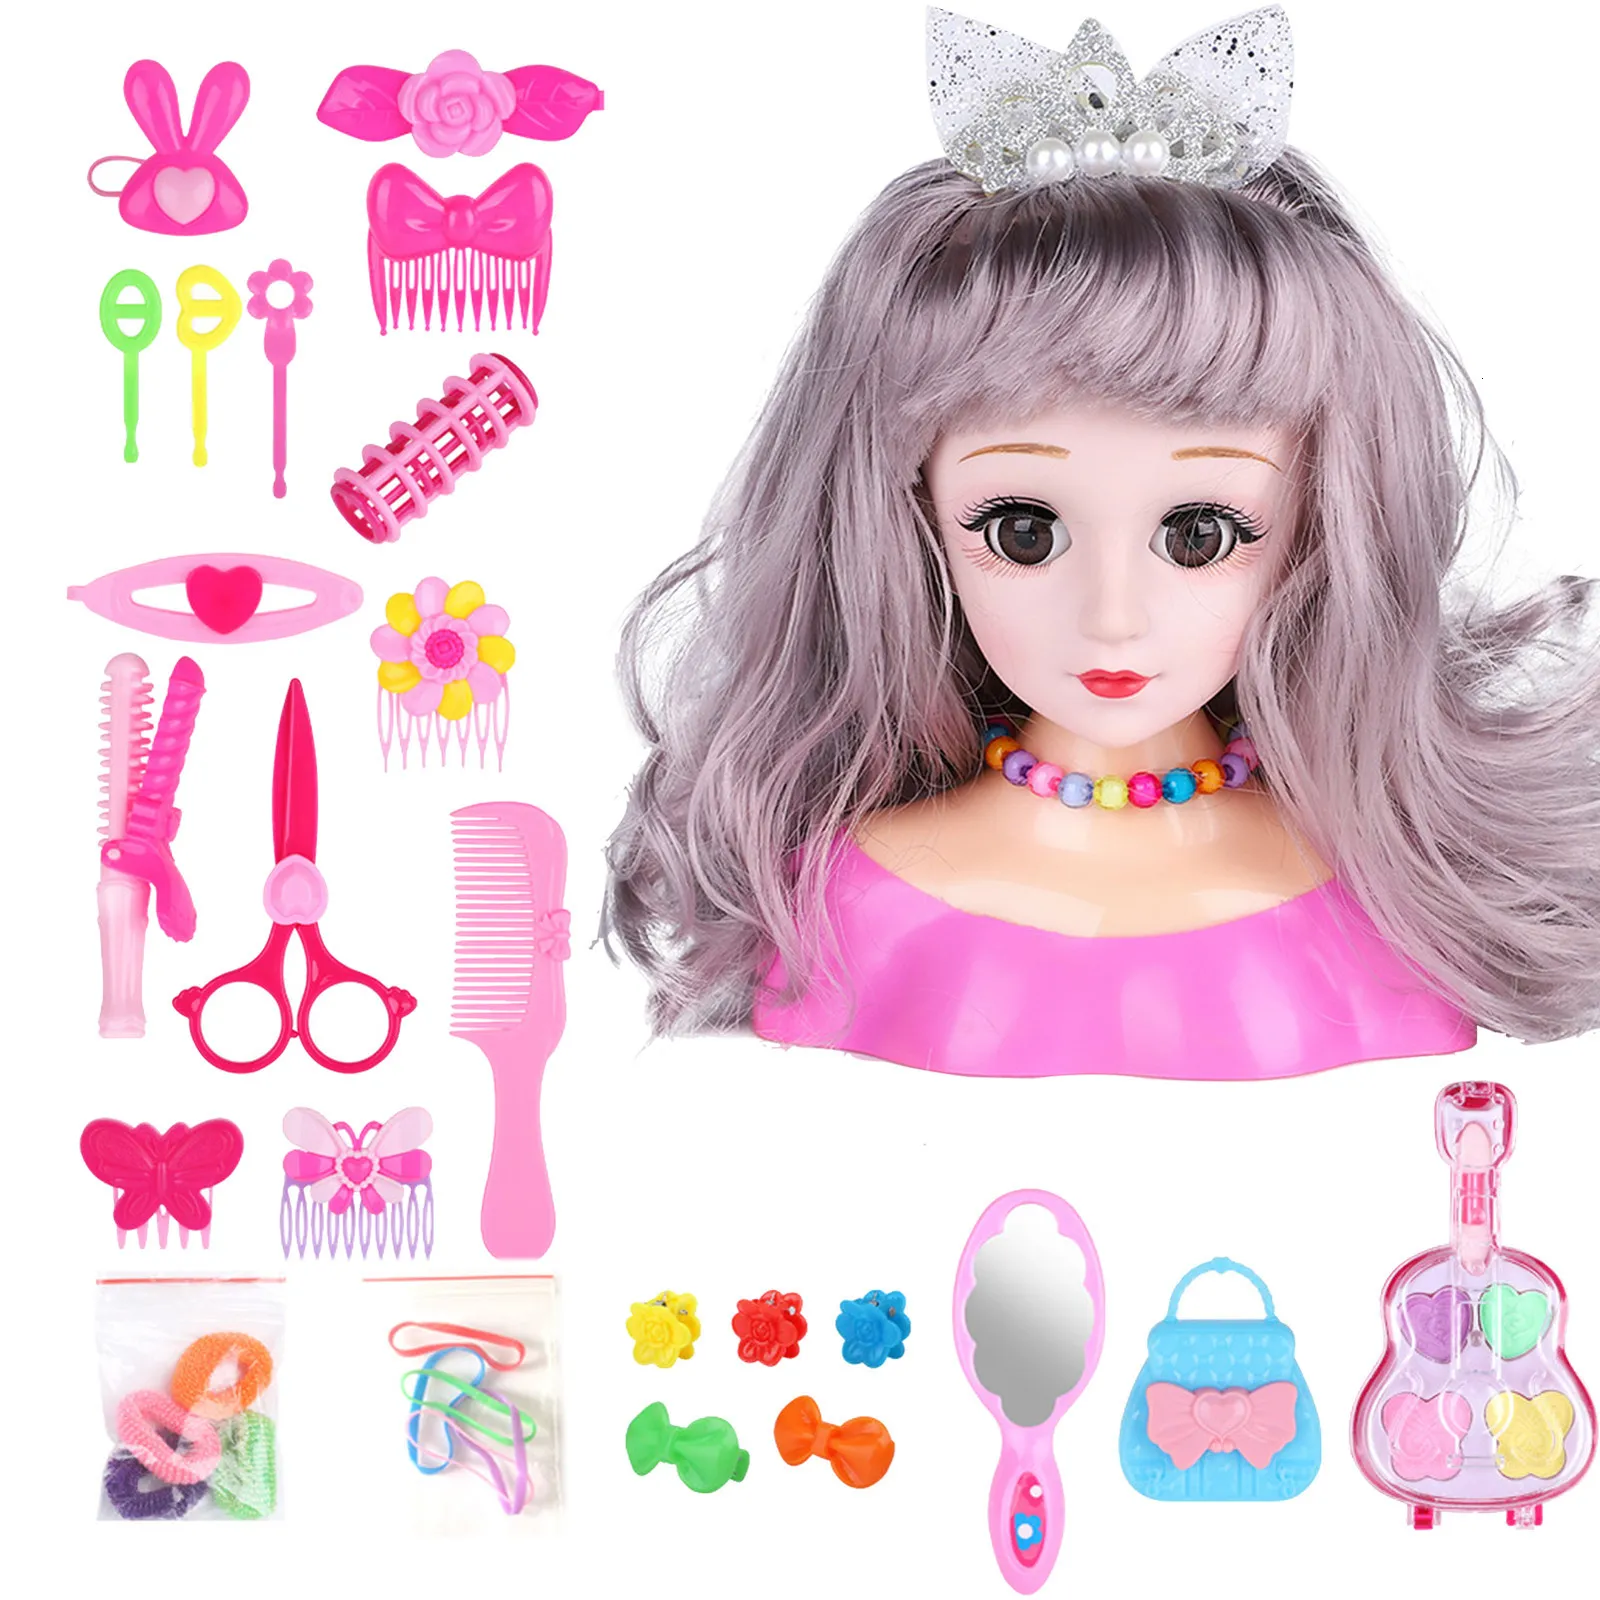 Kids Dolls Styling Head Makeup Comb Hair Toy Doll Set Pretend Play Princess Dressing Play Toys Little Girls Makeup Learning Present